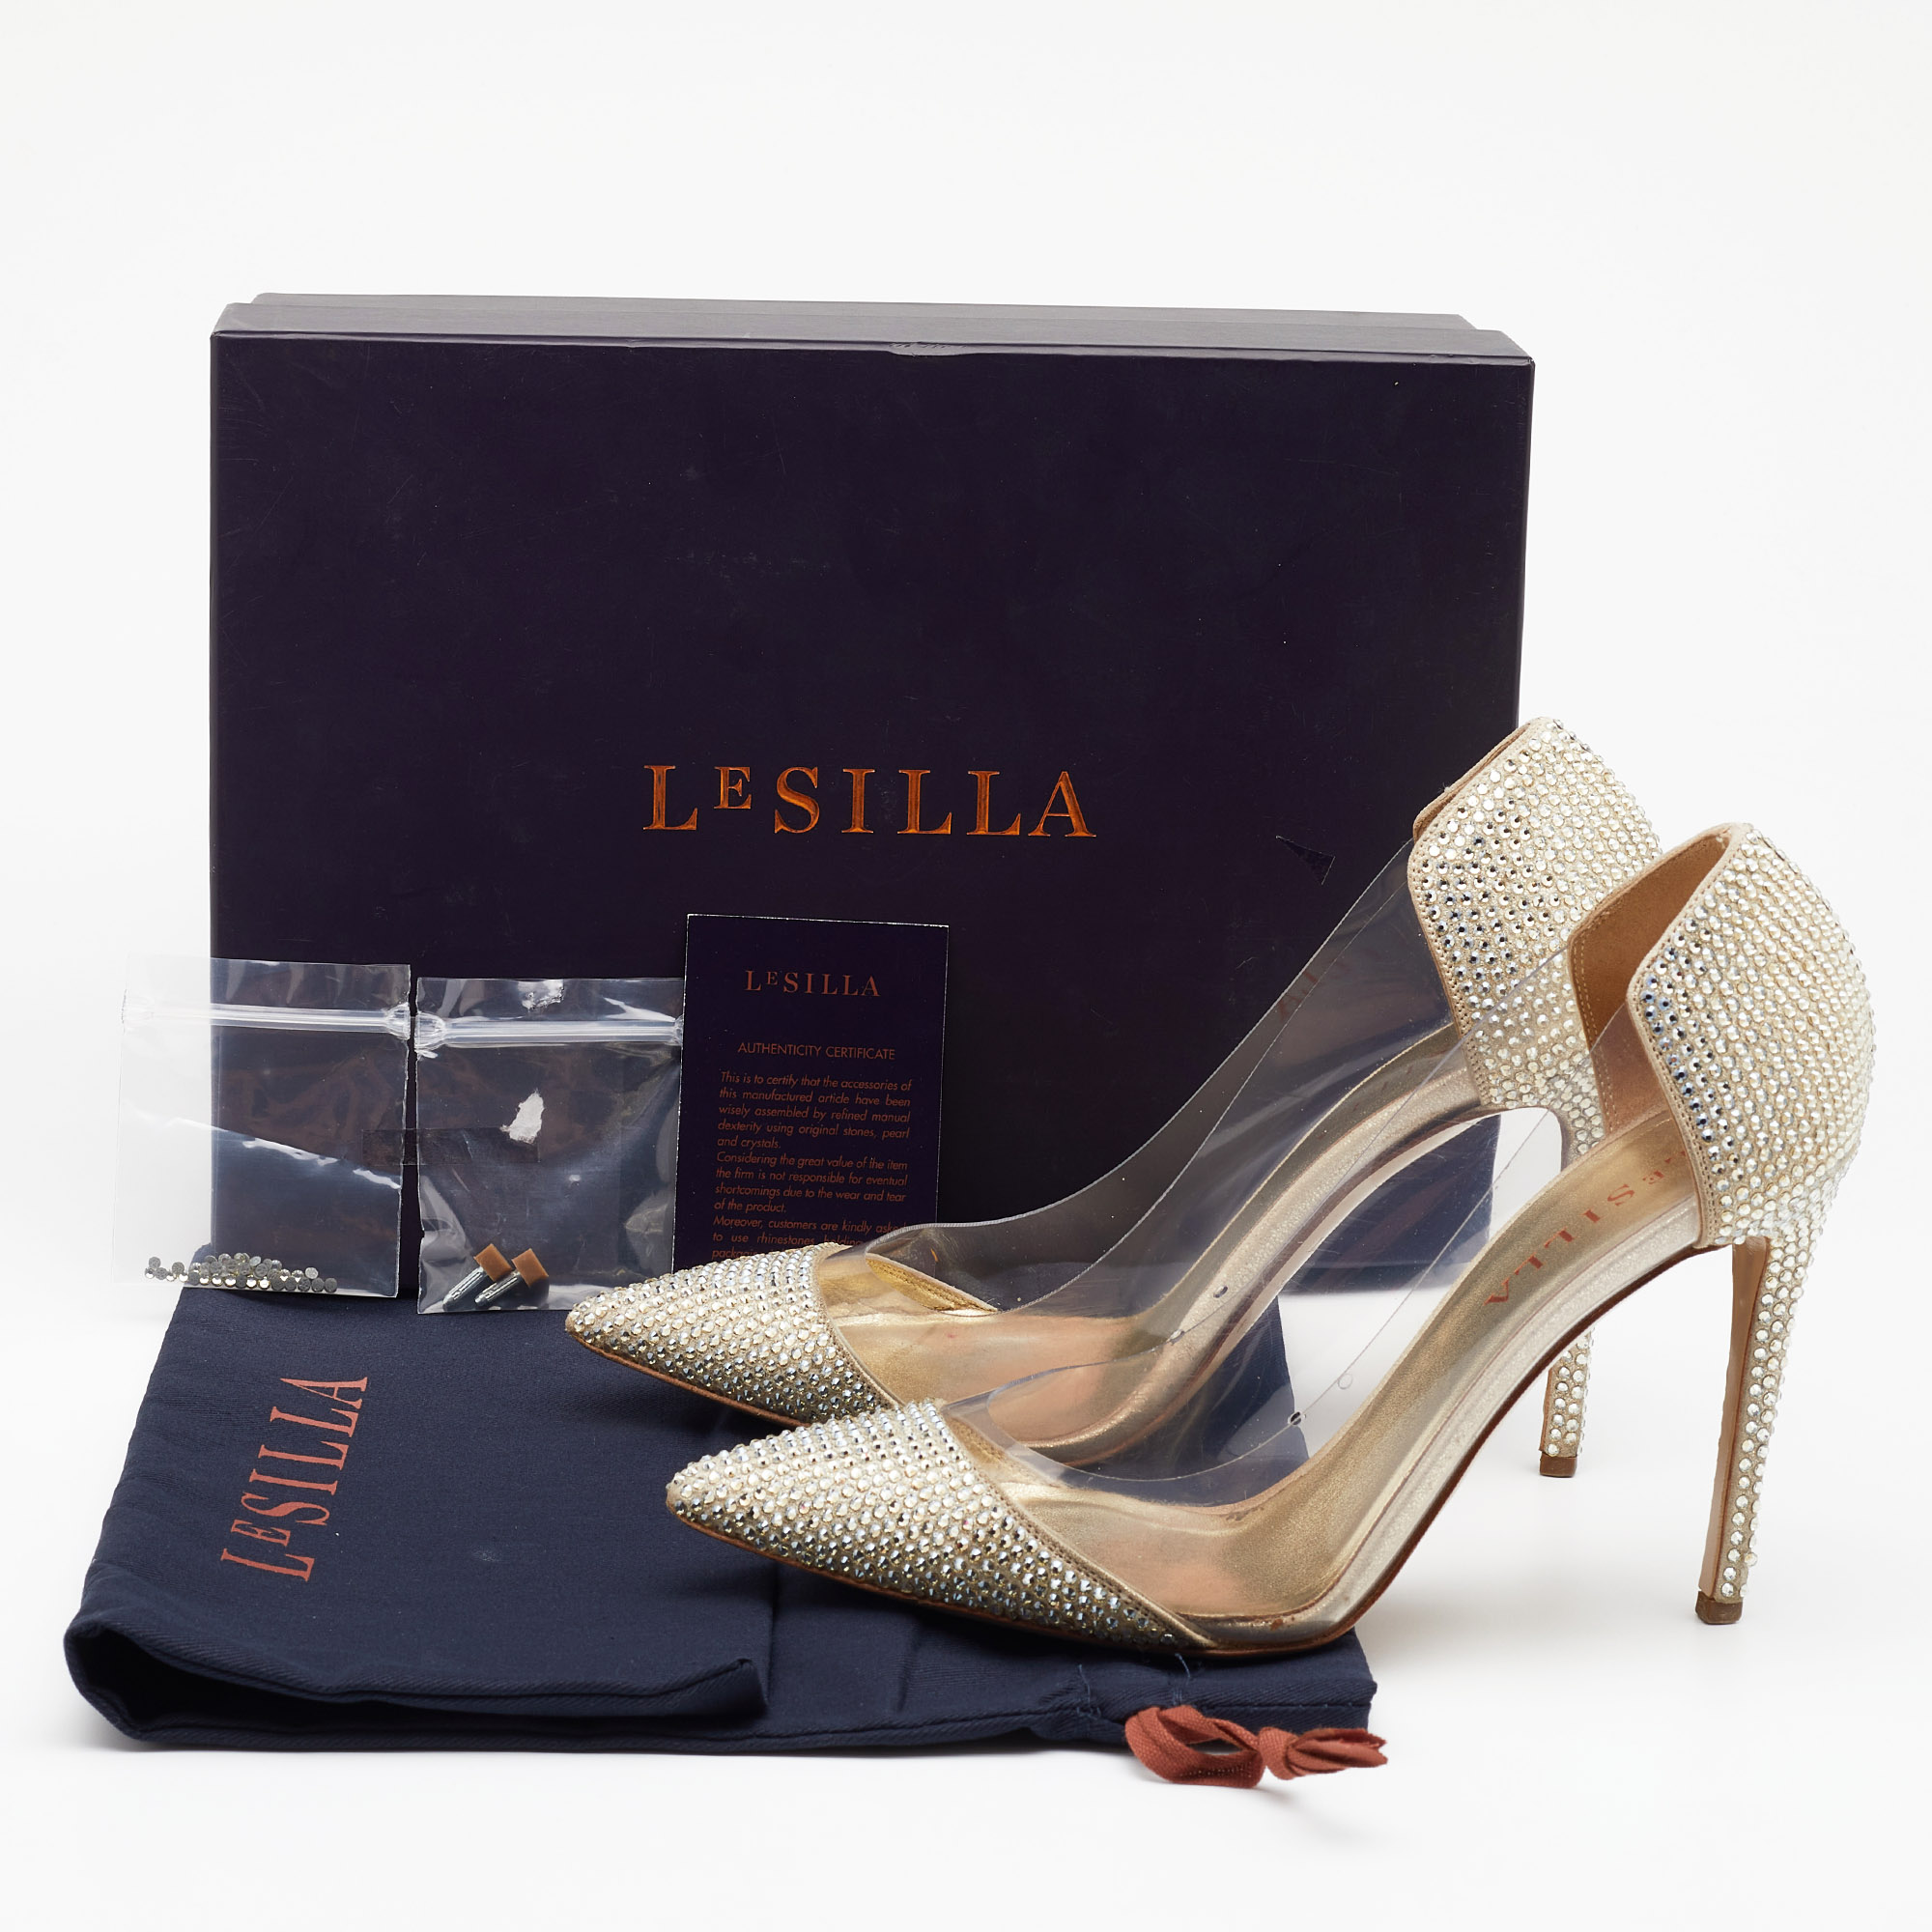 Le Silla Metallic Gold Suede And PVC Crystal Embellished Pumps Size 37